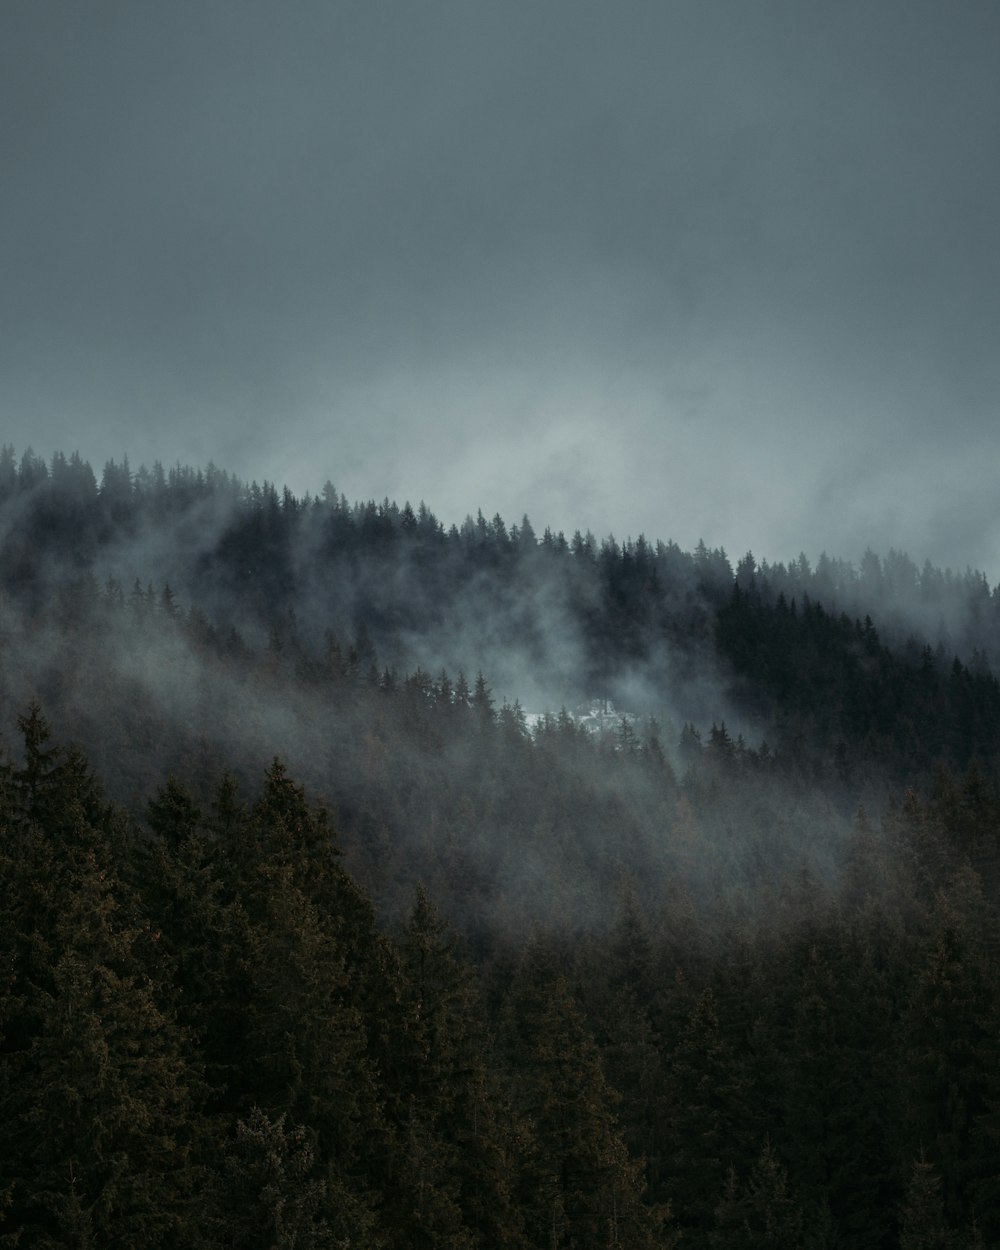 a mountain covered in fog with trees in the foreground